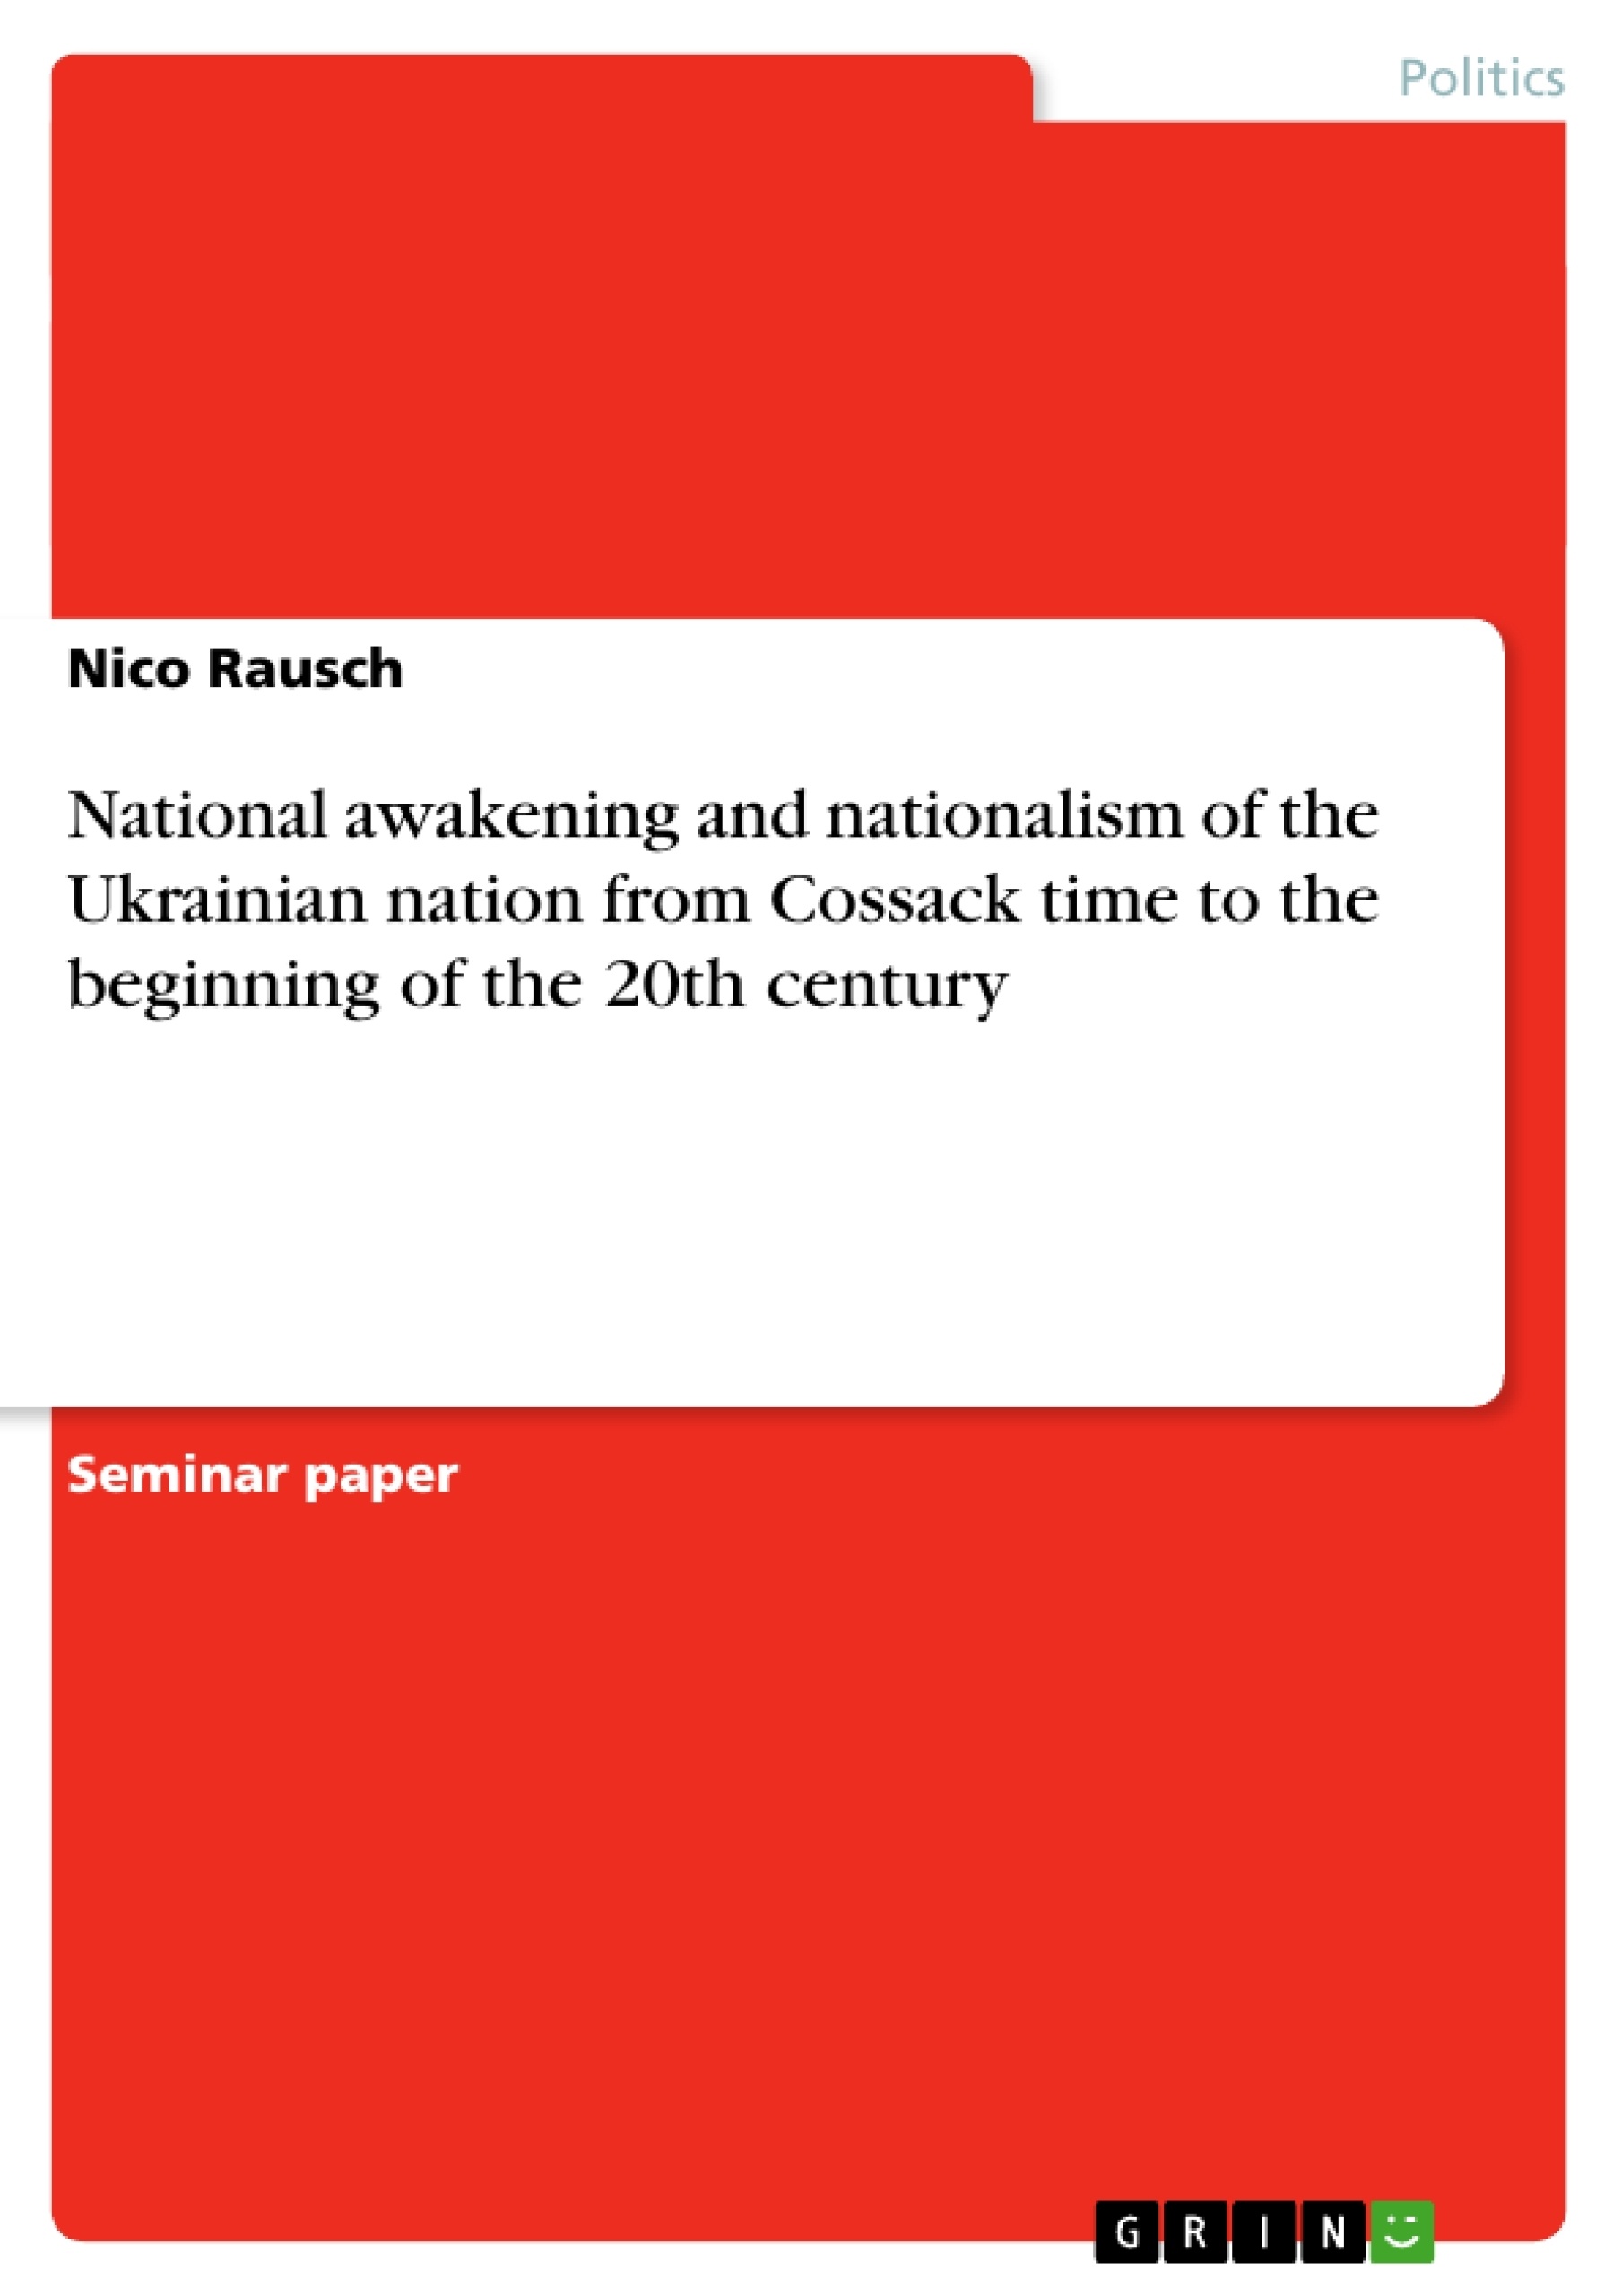 Title: National awakening and nationalism of the Ukrainian nation from Cossack time to the beginning of the 20th century 